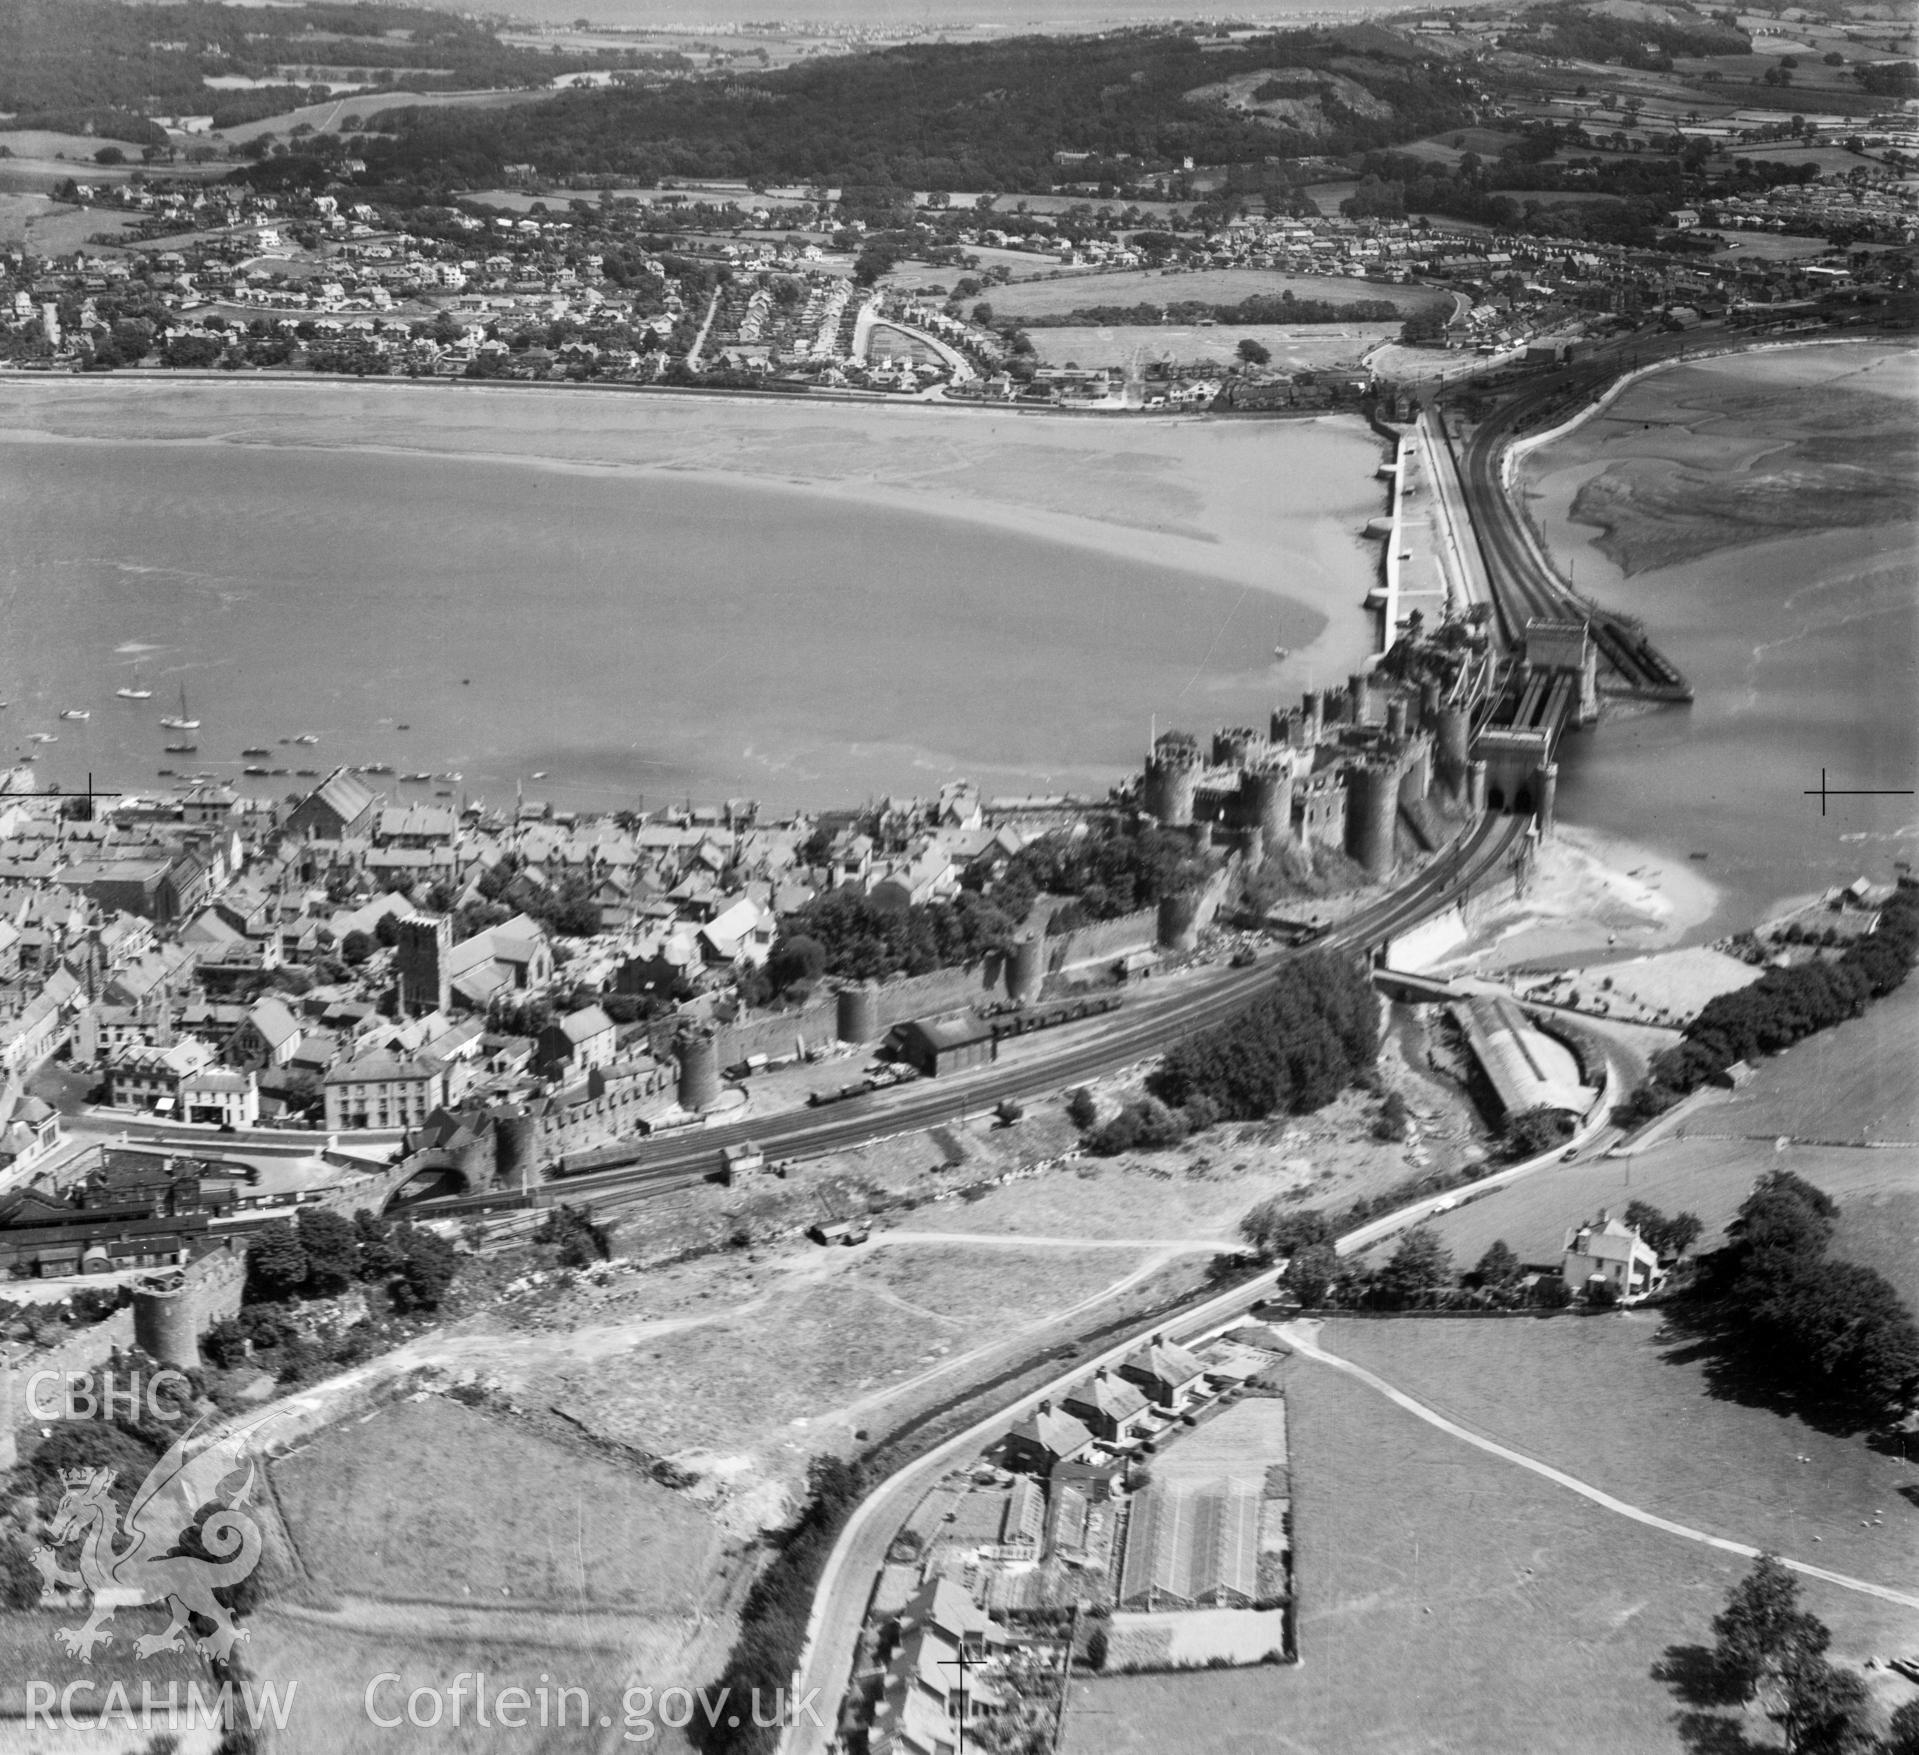 View of Conwy showing castle